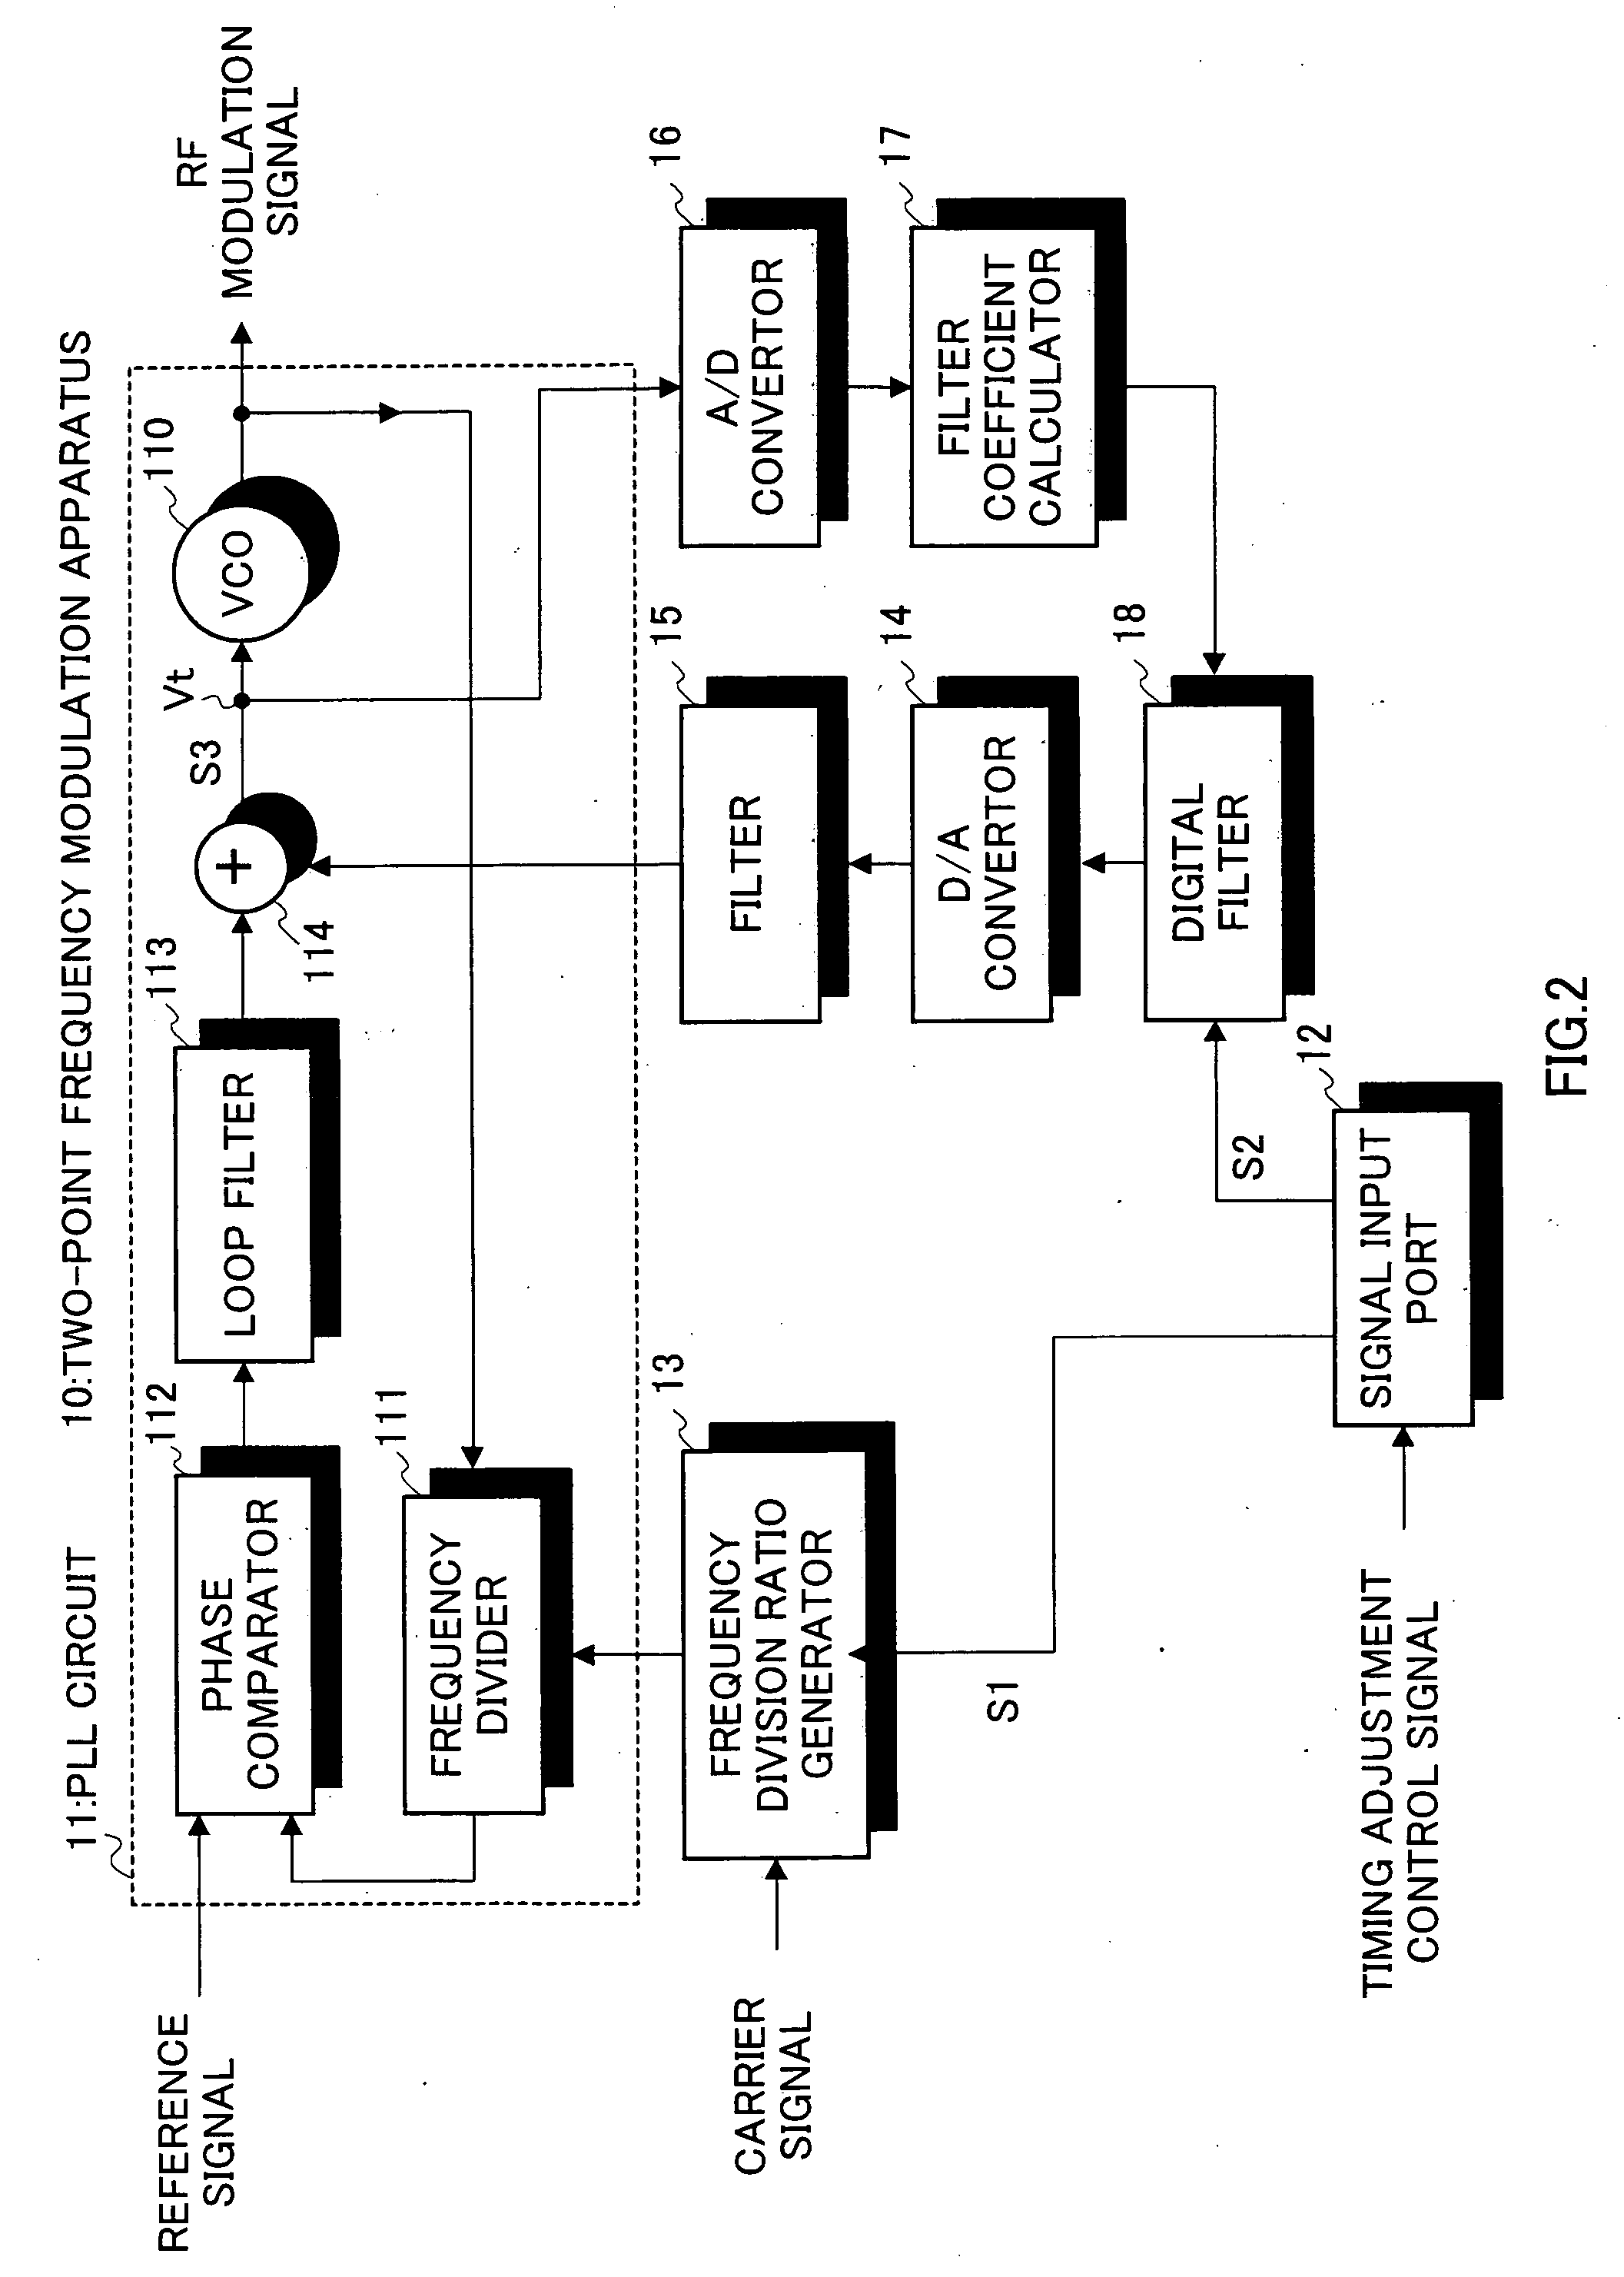 Two-point frequency modulation apparatus, wireless transmitting apparatus, and wireless receiving apparatus